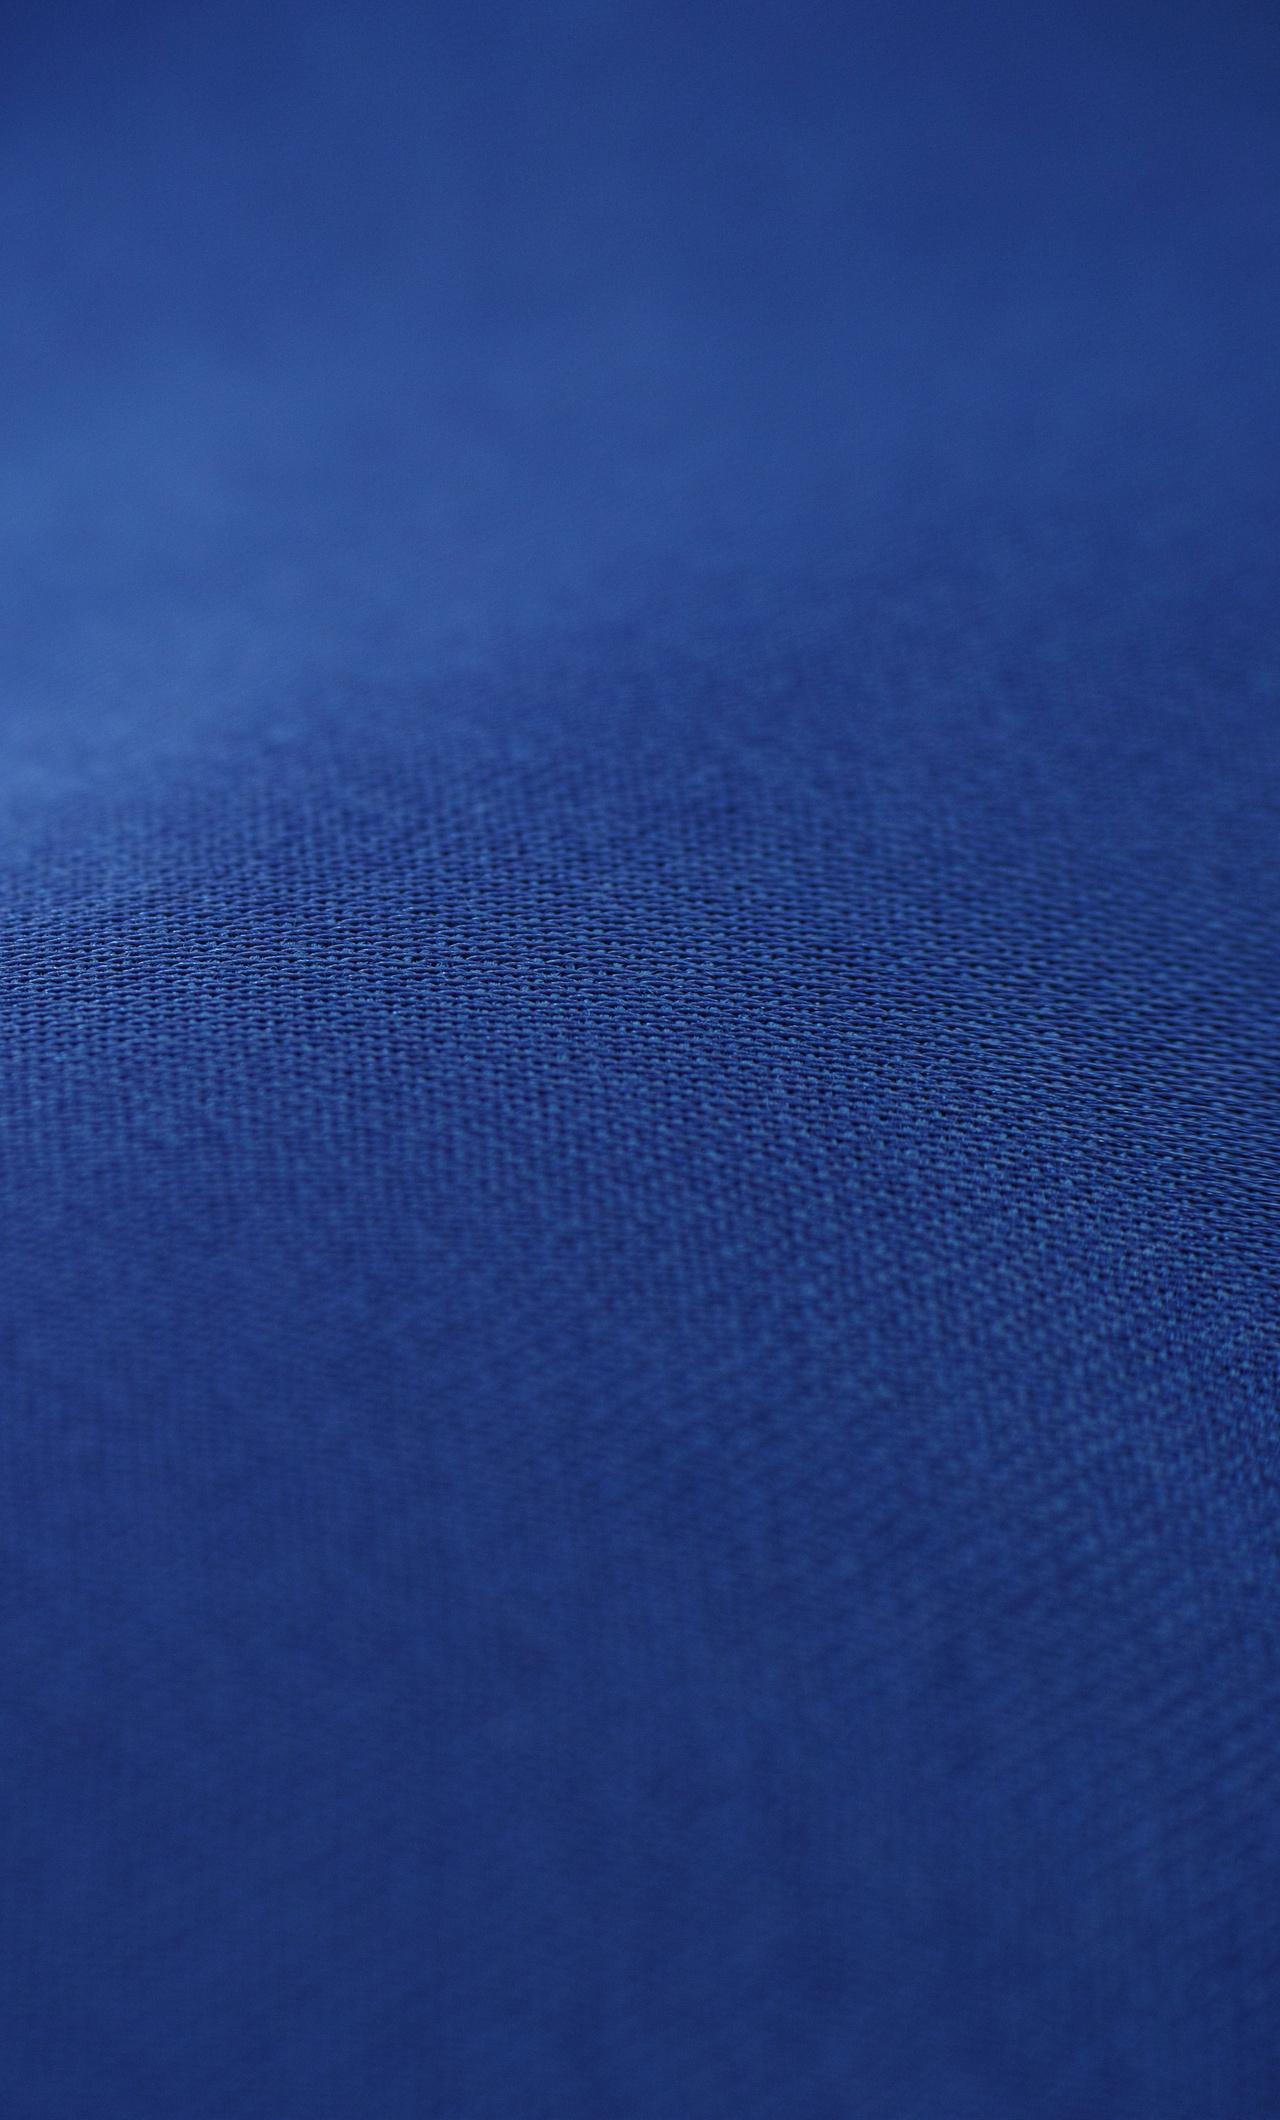 Blue Fabric Wallpapers - Top Free Blue Fabric Backgrounds - WallpaperAccess